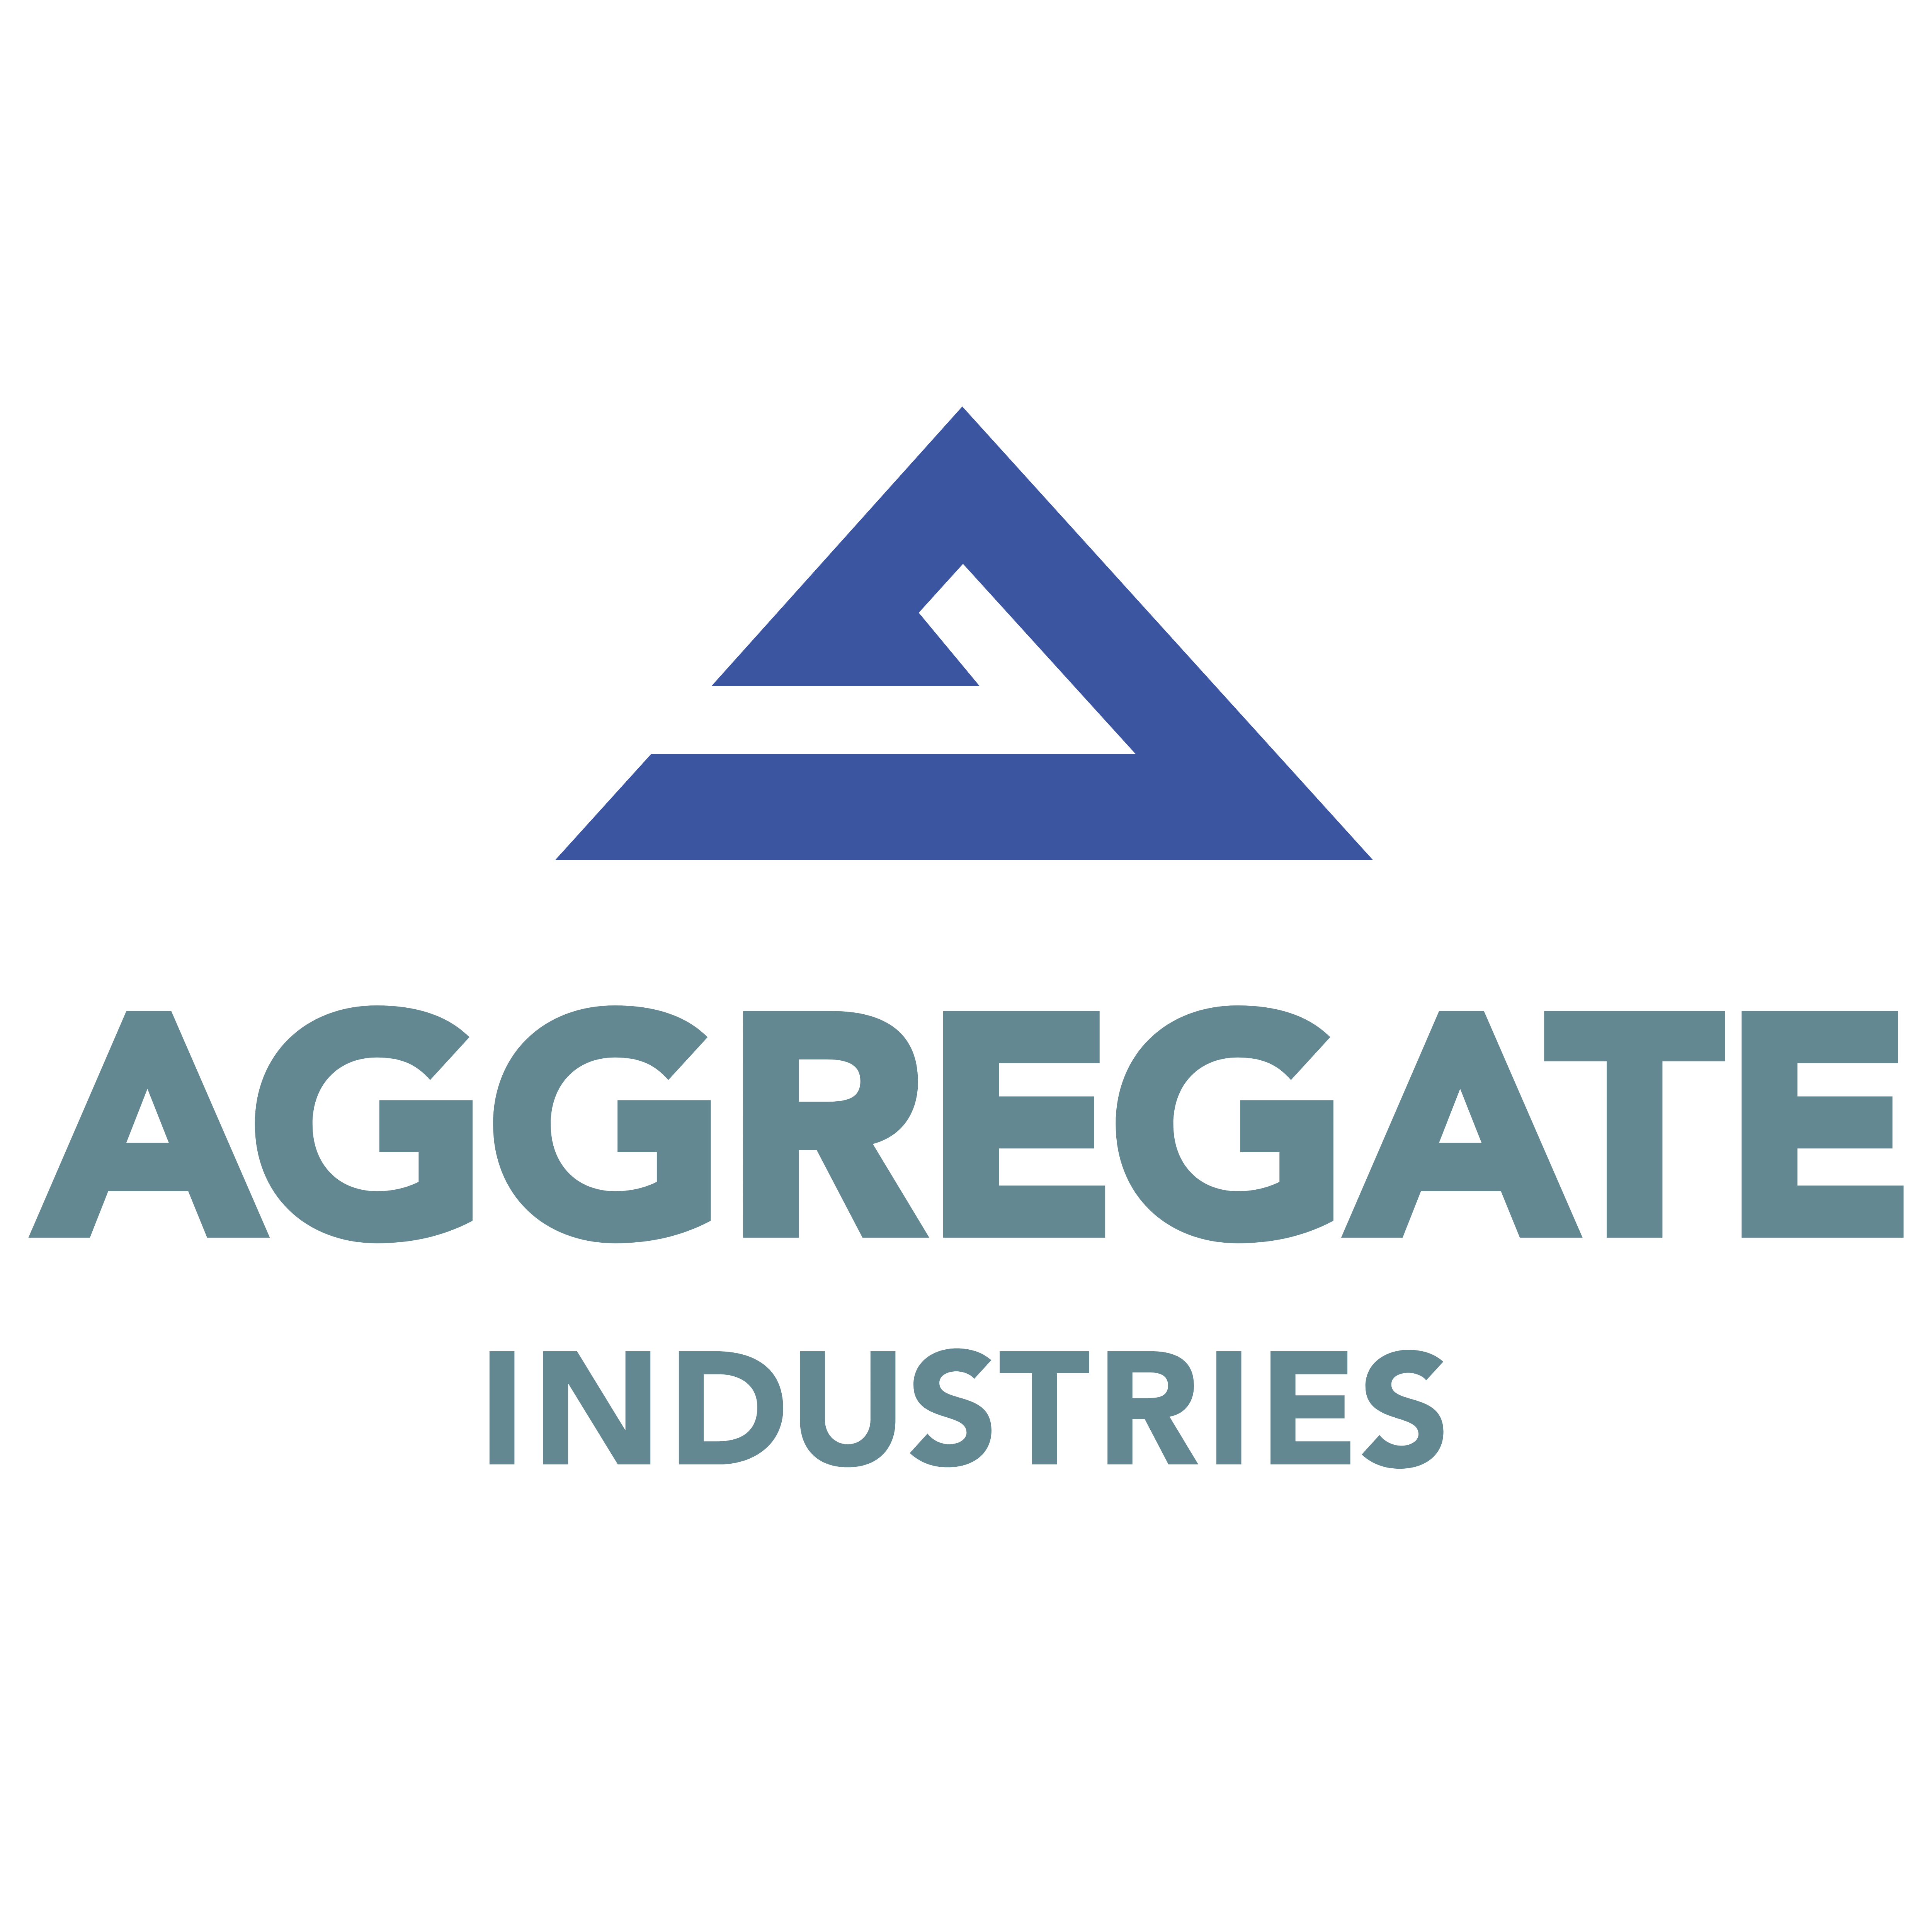 aggreagte industries logo